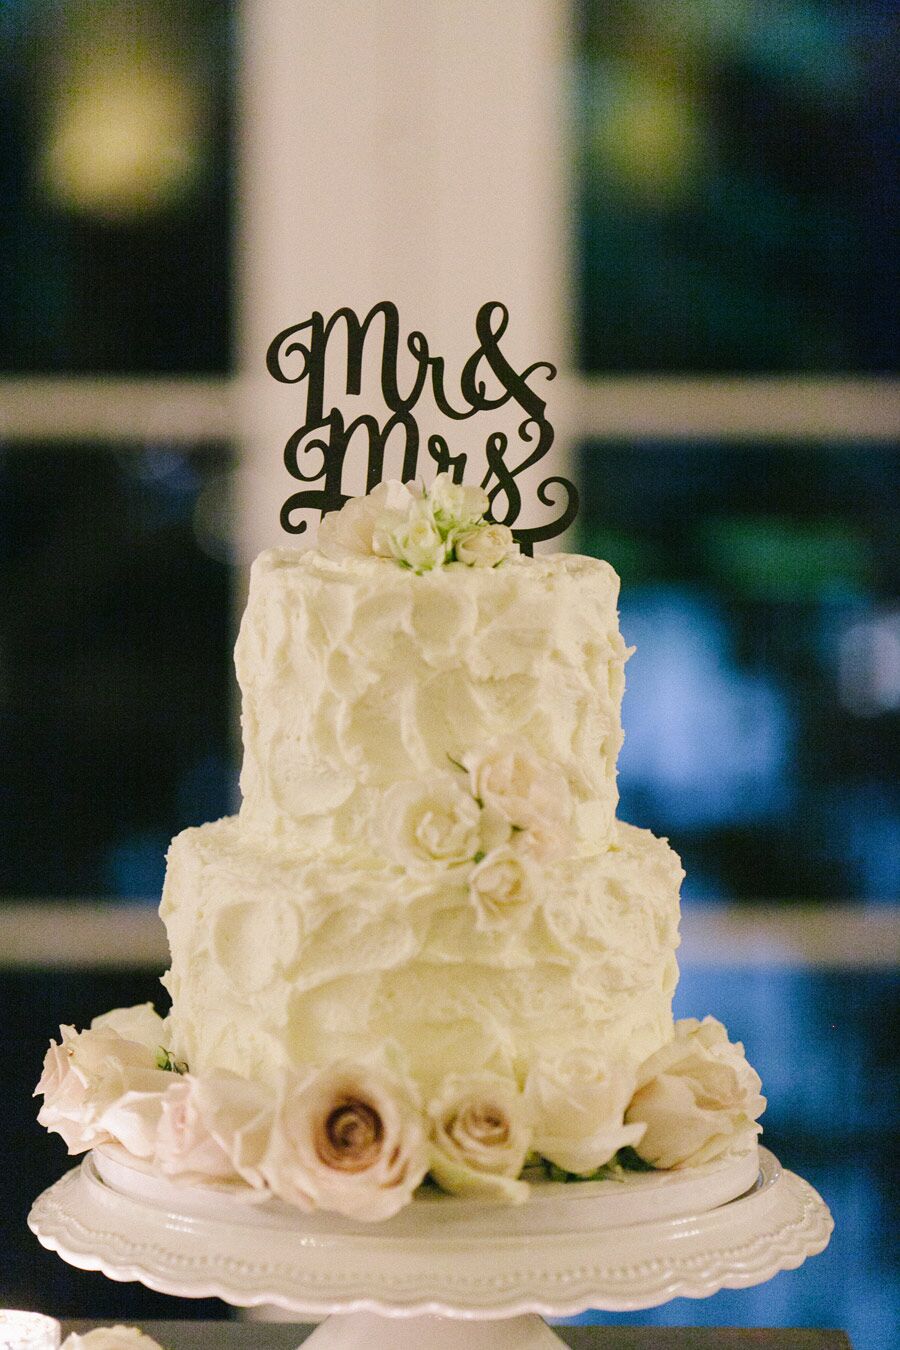 Details about   Mr and mrs wedding cake topper wedding decoration 